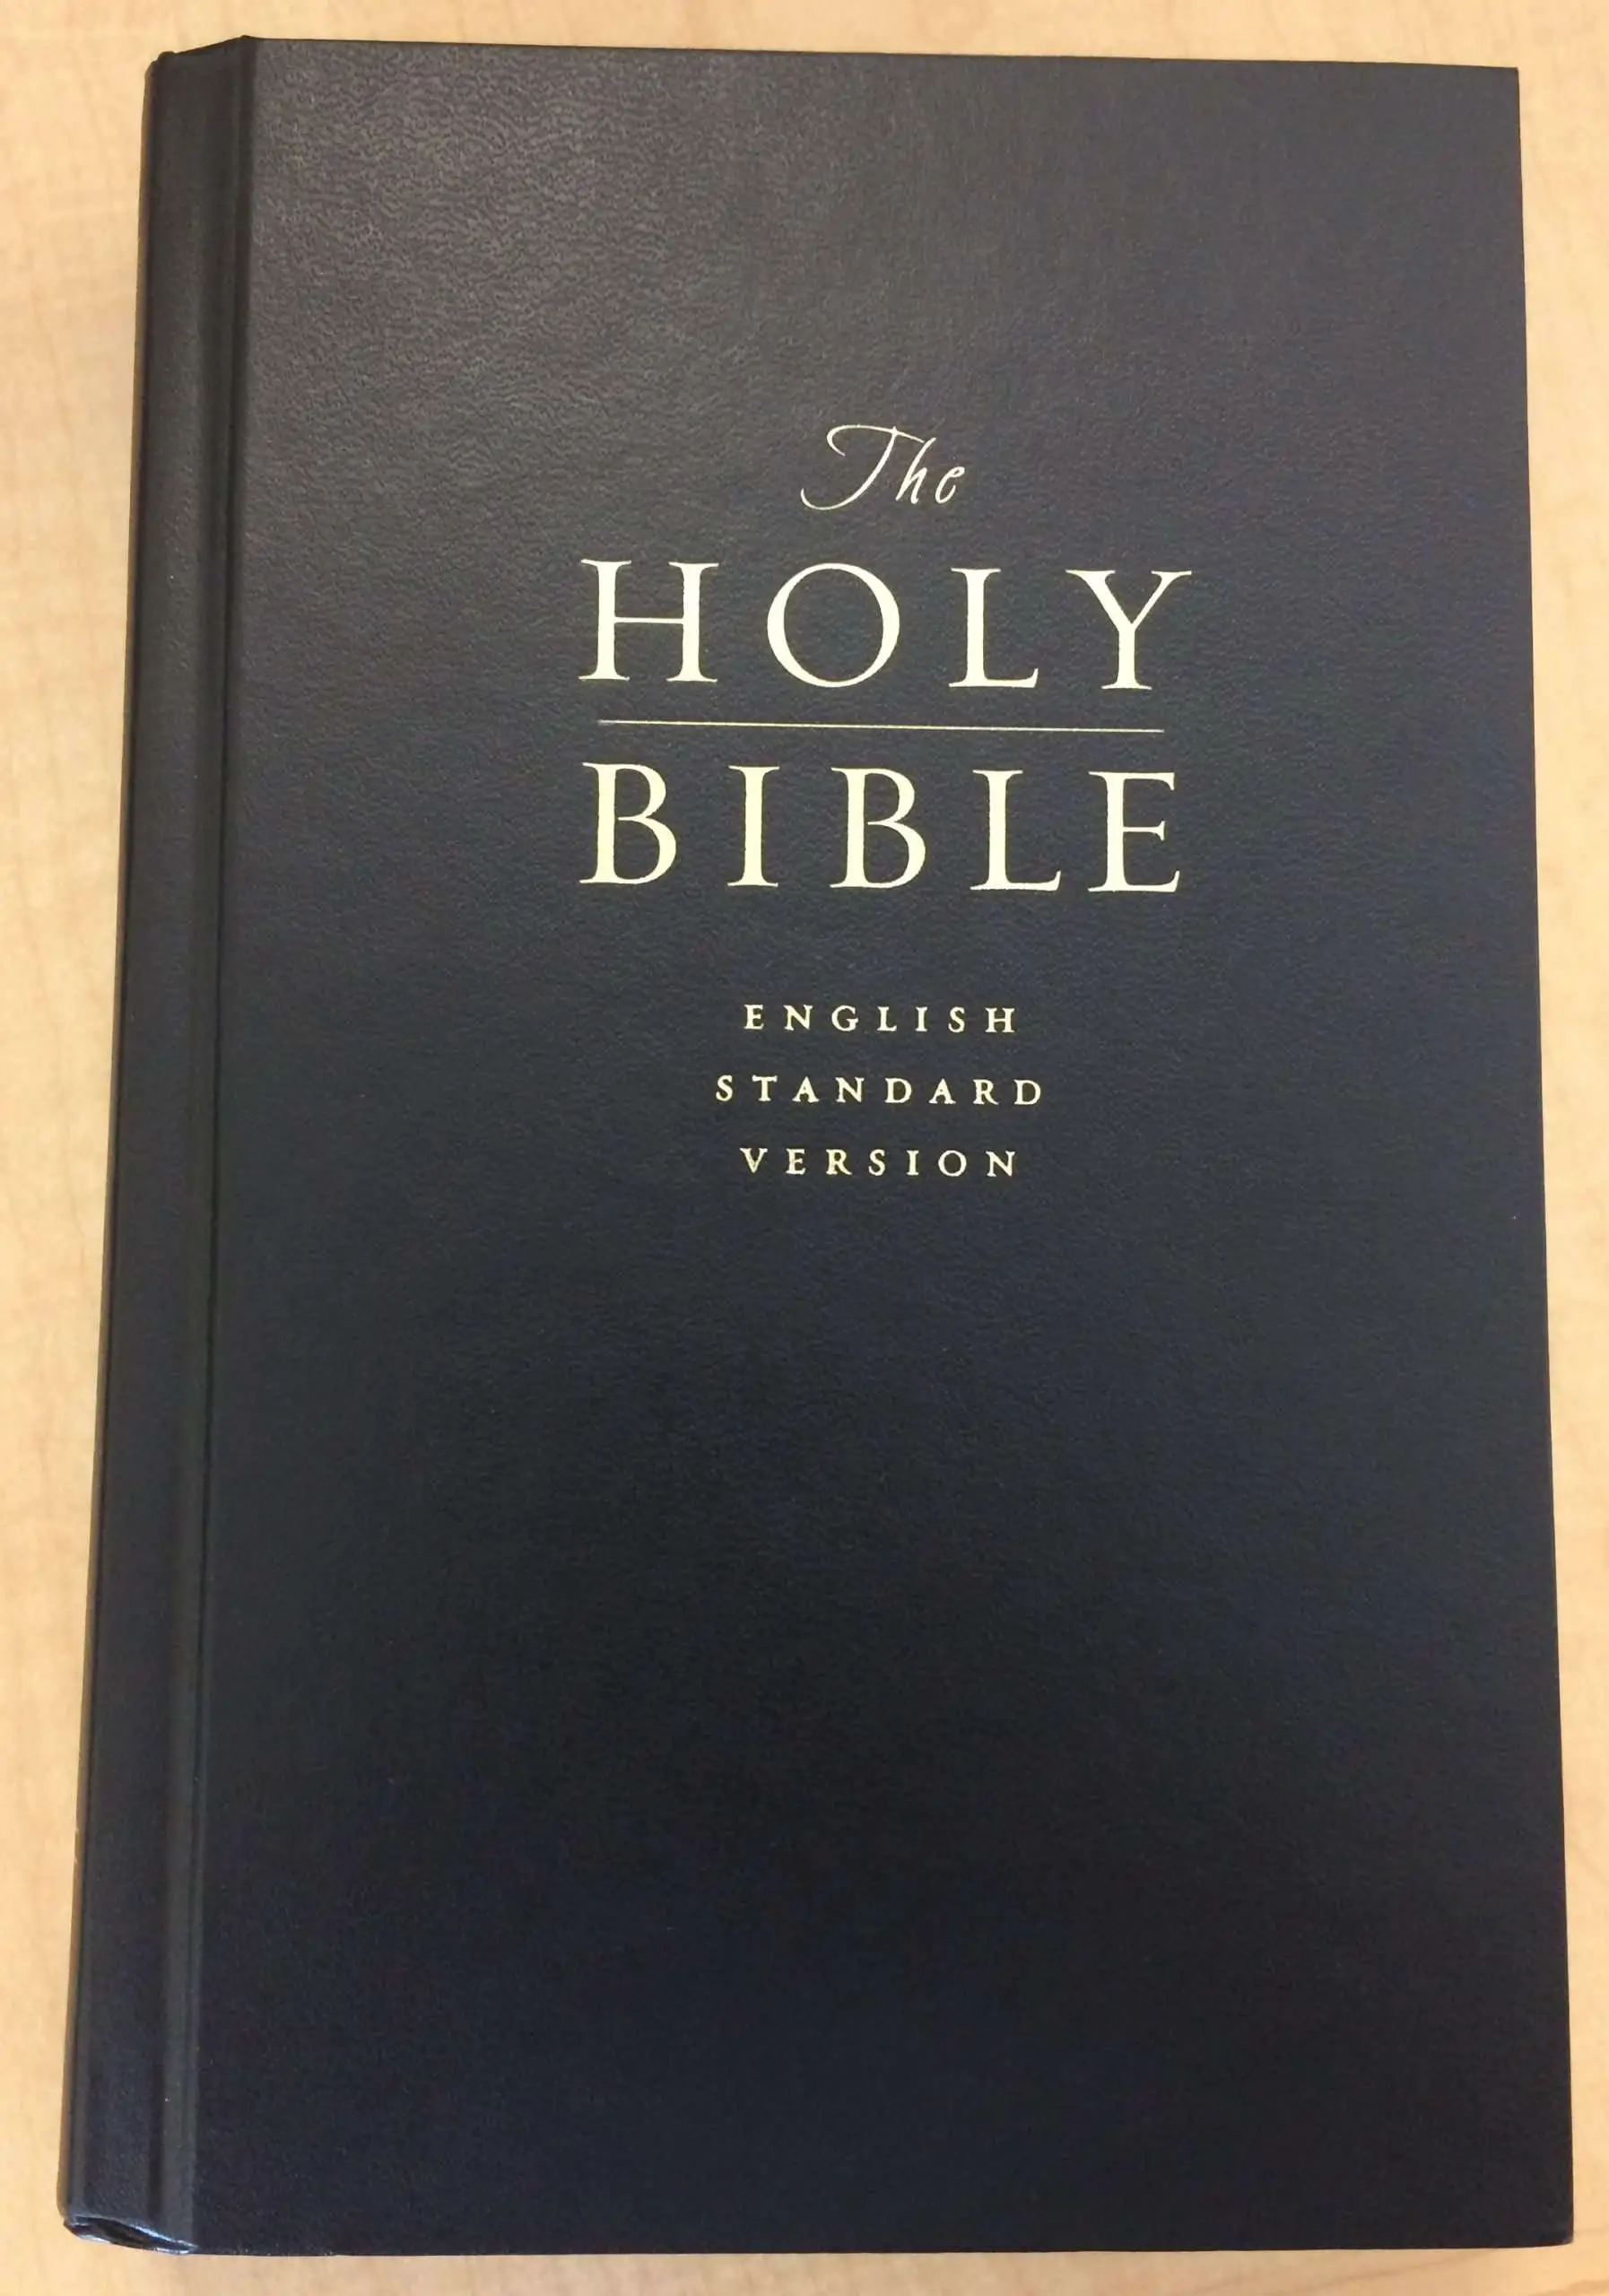 easiest bible to understand for beginners